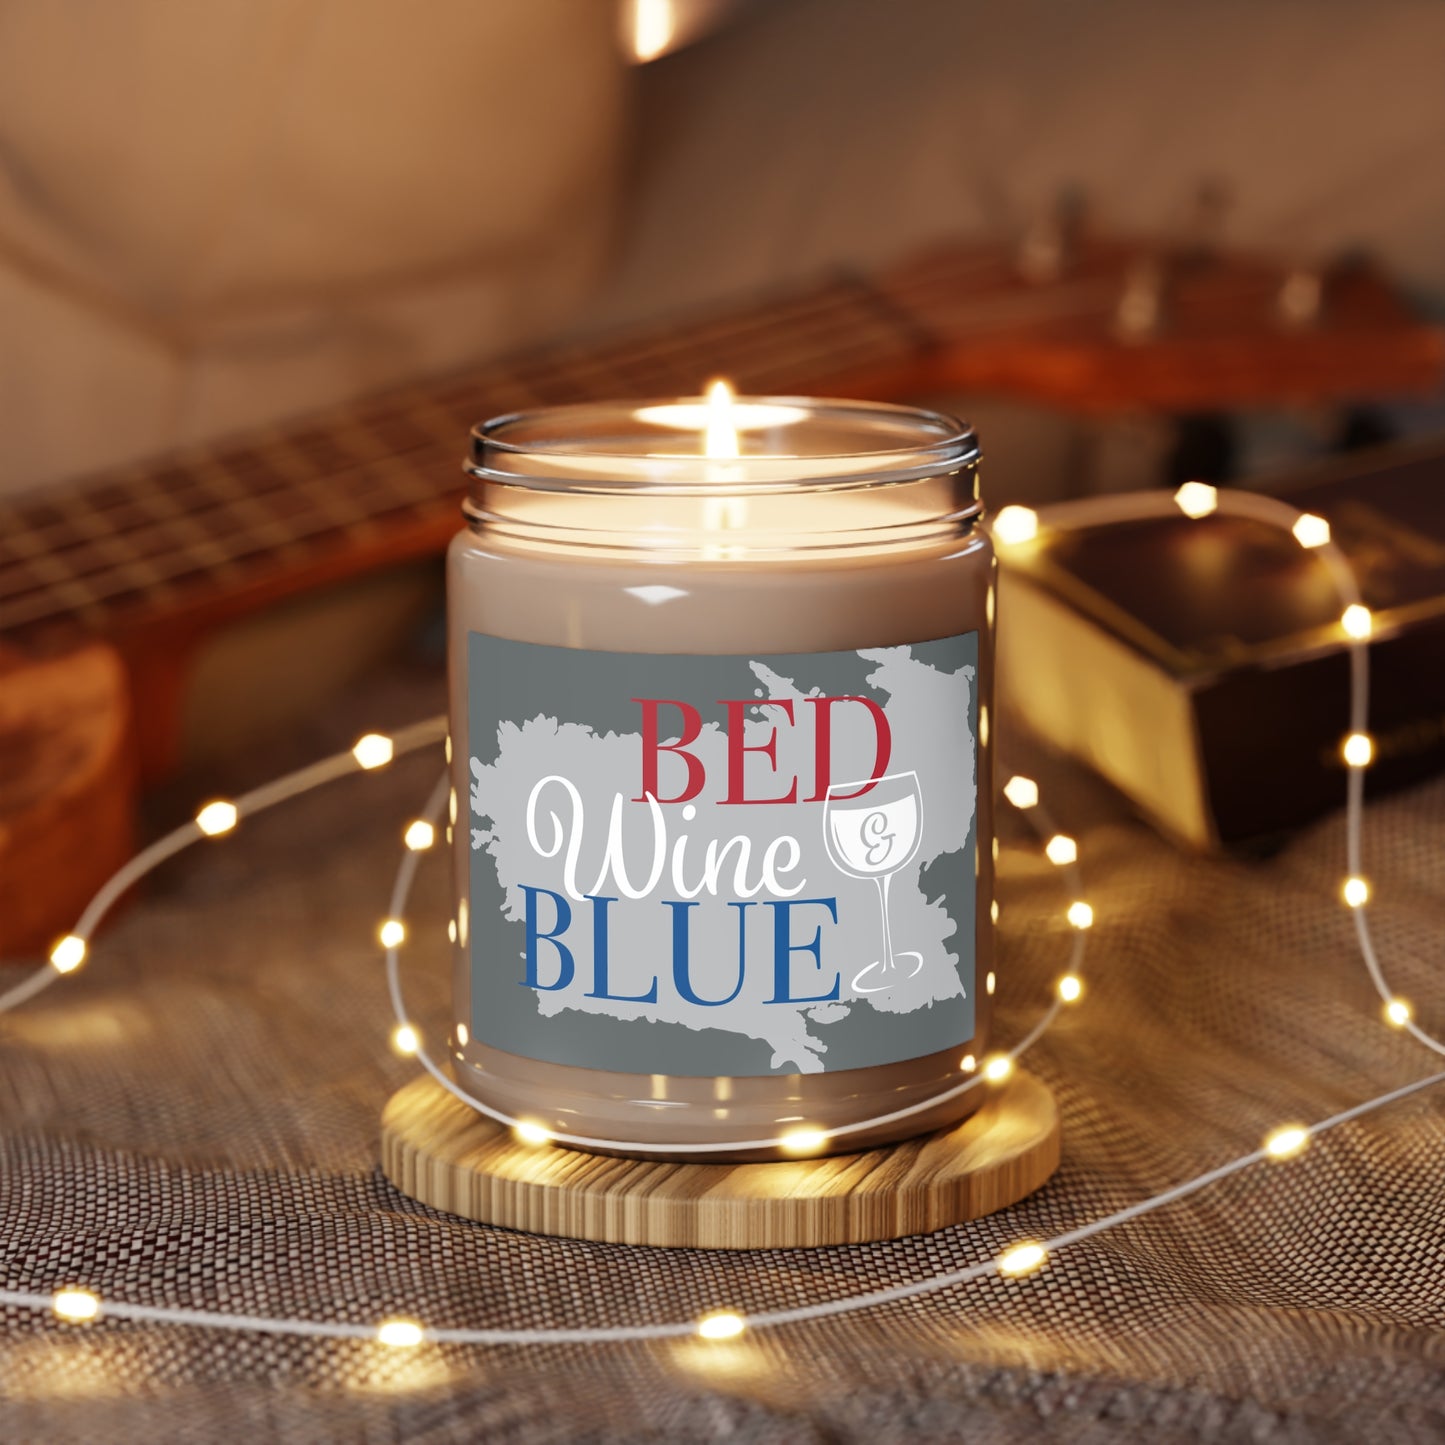 Patriotic Bed, Wine, Blue Scented Candles, 9oz